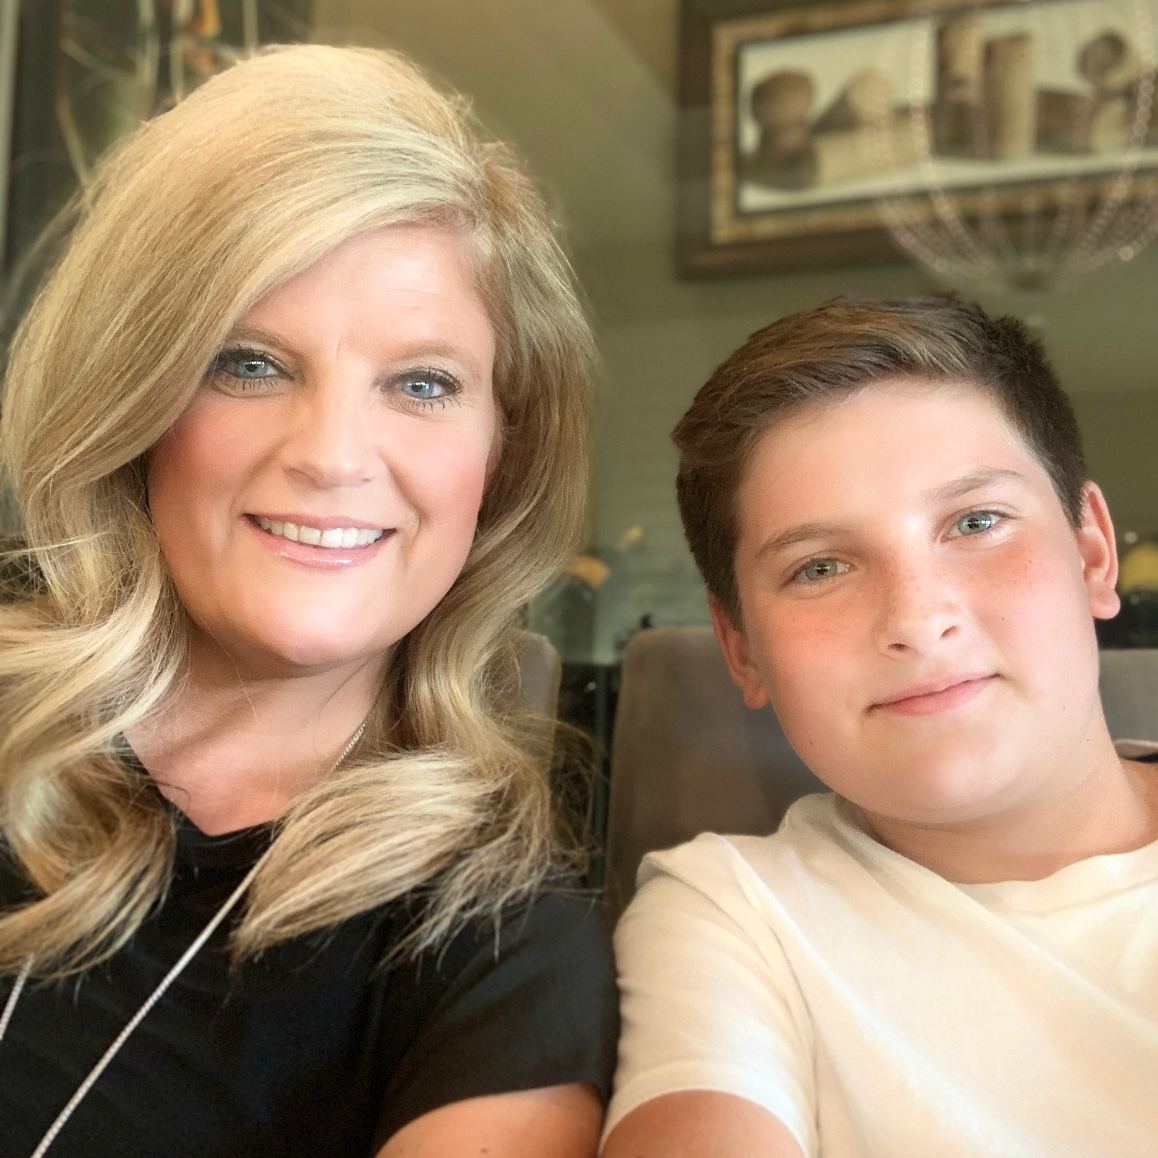 Nicole Bloom of Richmond American Homes and her son